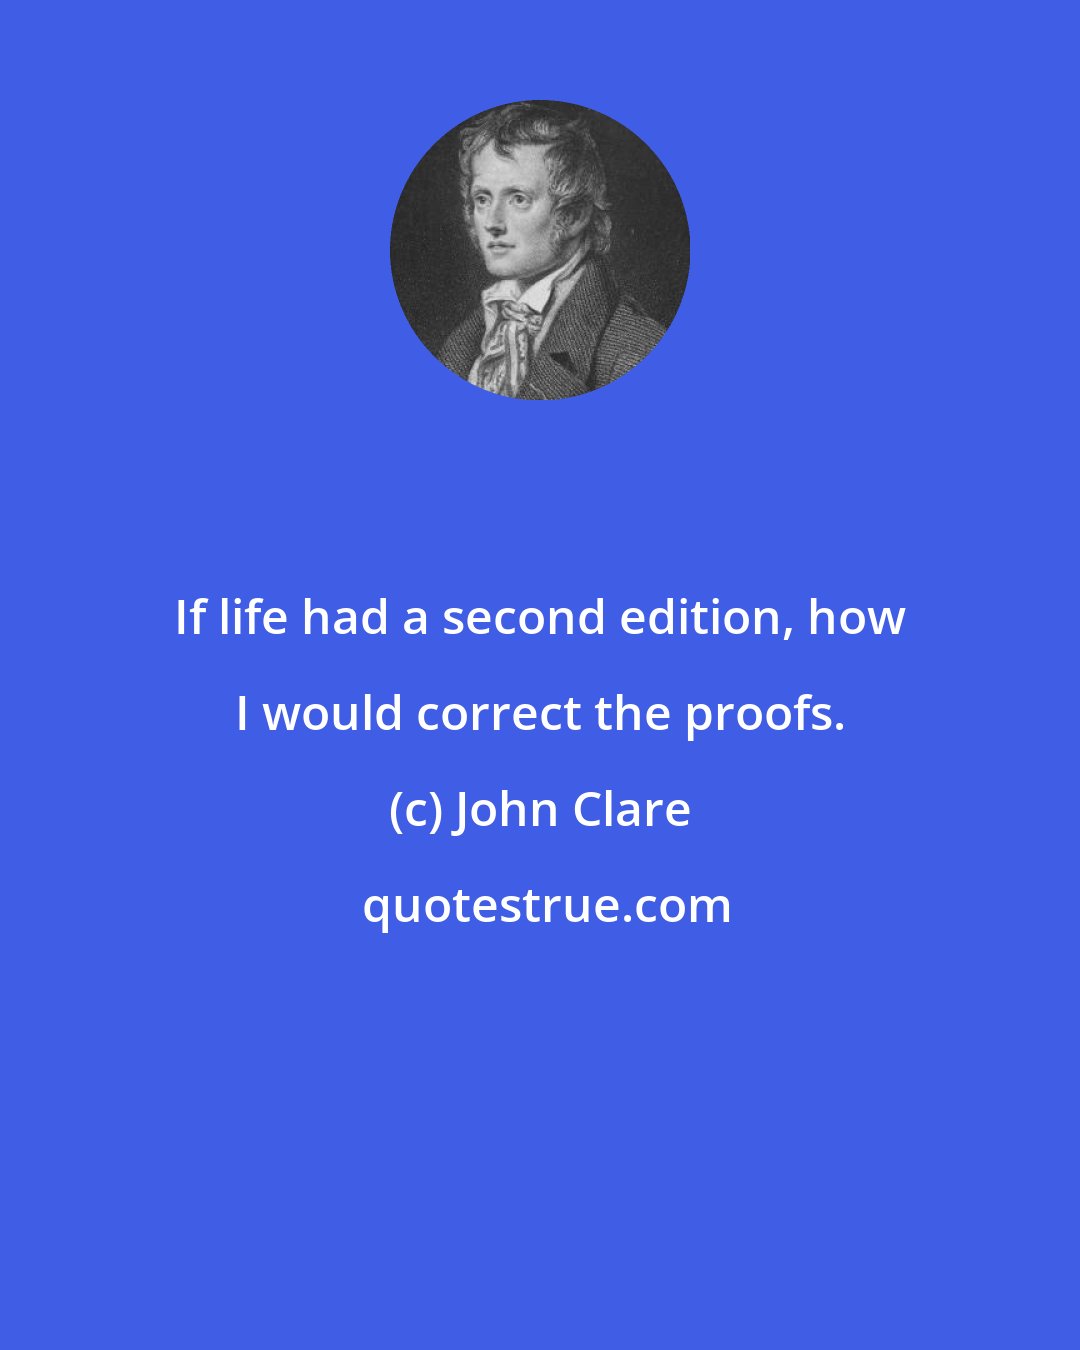 John Clare: If life had a second edition, how I would correct the proofs.